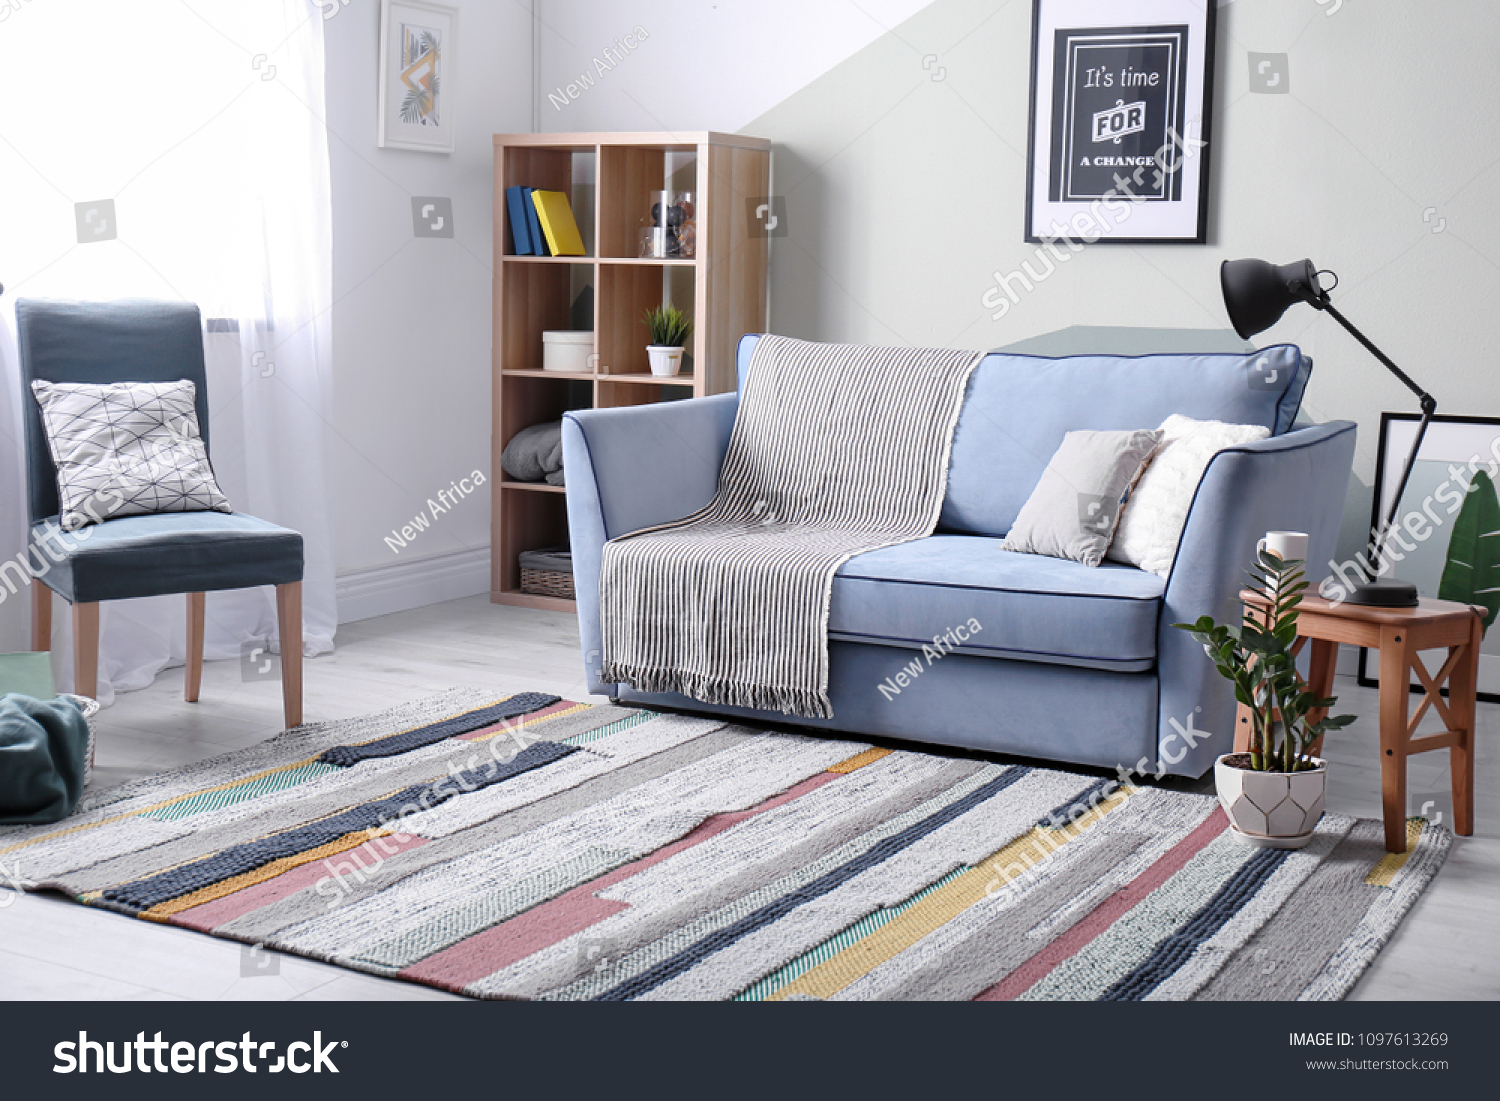 Stylish living room interior with comfortable sofa and armchair #1097613269